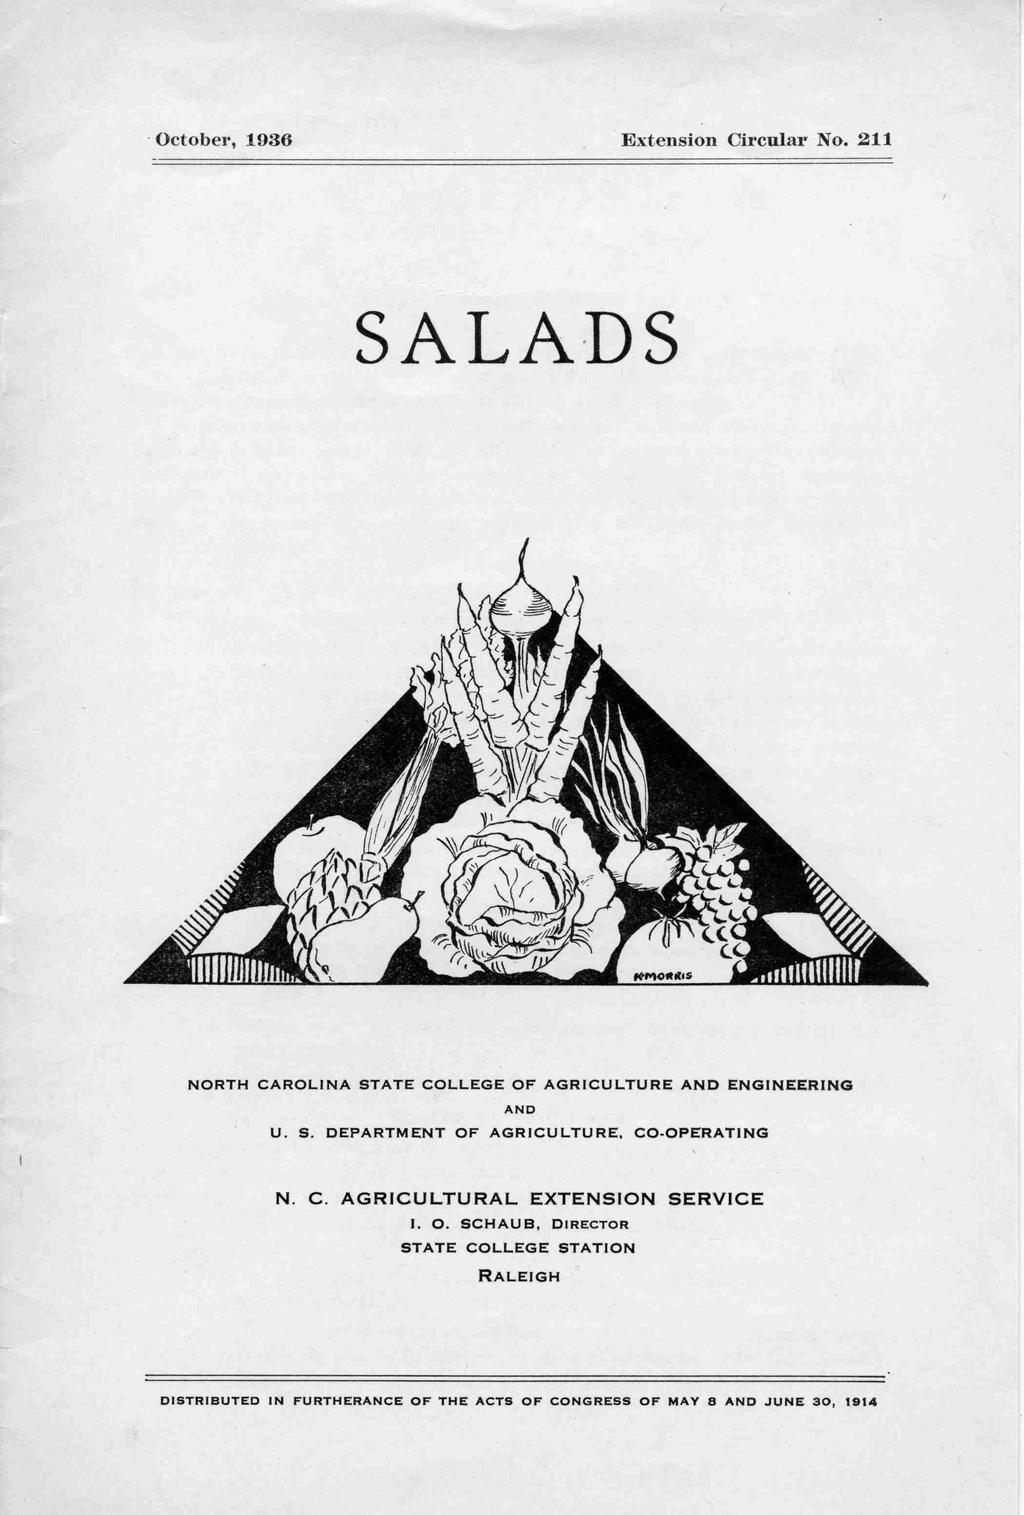 October, 1936 Extension Circular No. 211 SALADS millmm'm NORTH CAROLINA STATE COLLEGE OF AGRICULTURE AND ENGINEERING AND U. S. DEPARTMENT OF AGRICULTURE, CO-OPERATING N.